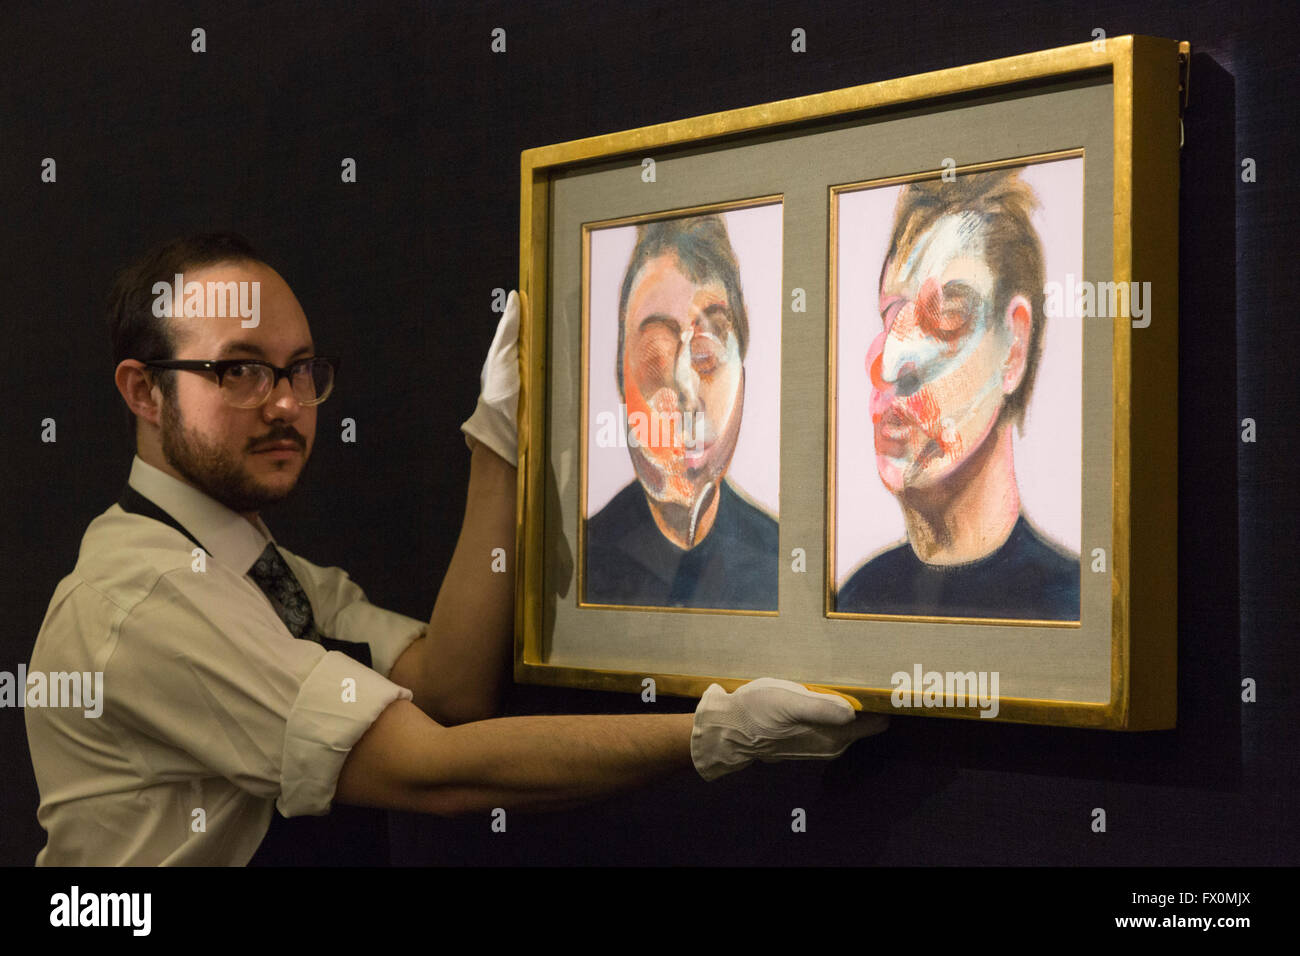 London, UK. 8 April 2016. Two Studies for a Self-Portrait, 1970, by Francis Bacon, estimate: USD 22-30 million. Sotheby's London Auction Preview of art from the Contemporary Art Evening Auction in New York on 11 May 2016. Stock Photo